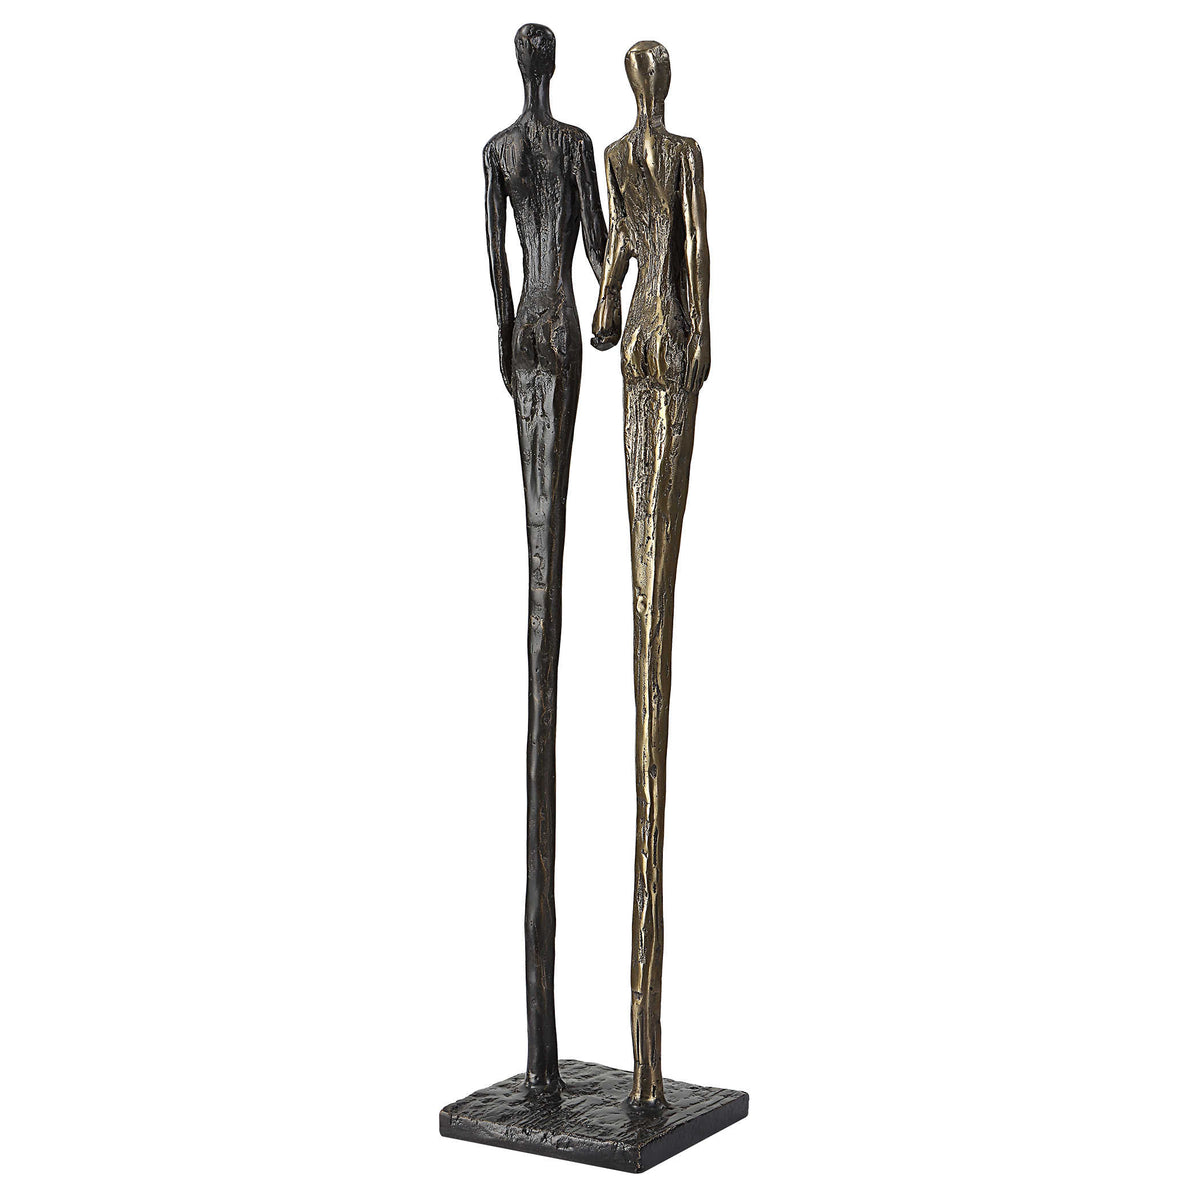 Two's Company Sculpture